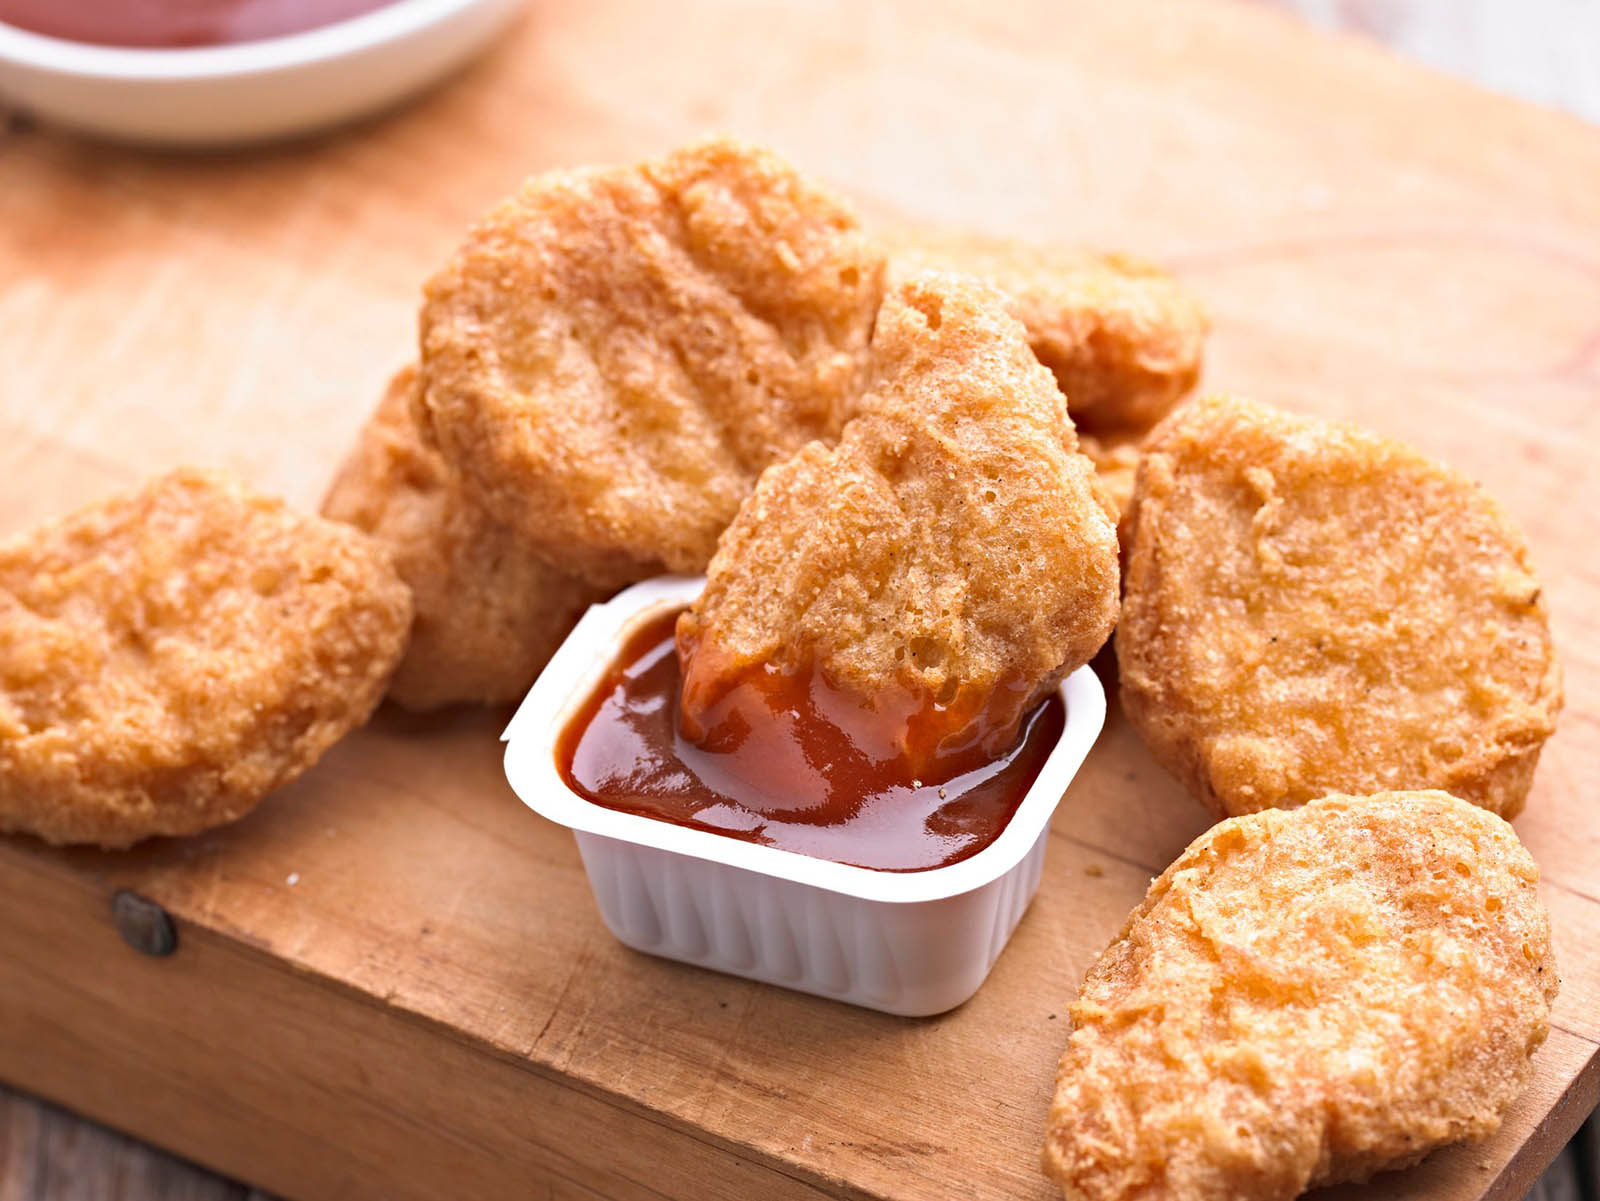 🥘 I Bet We Can Guess Your Age Based on the Food You’d Rather Eat Chicken Nuggets